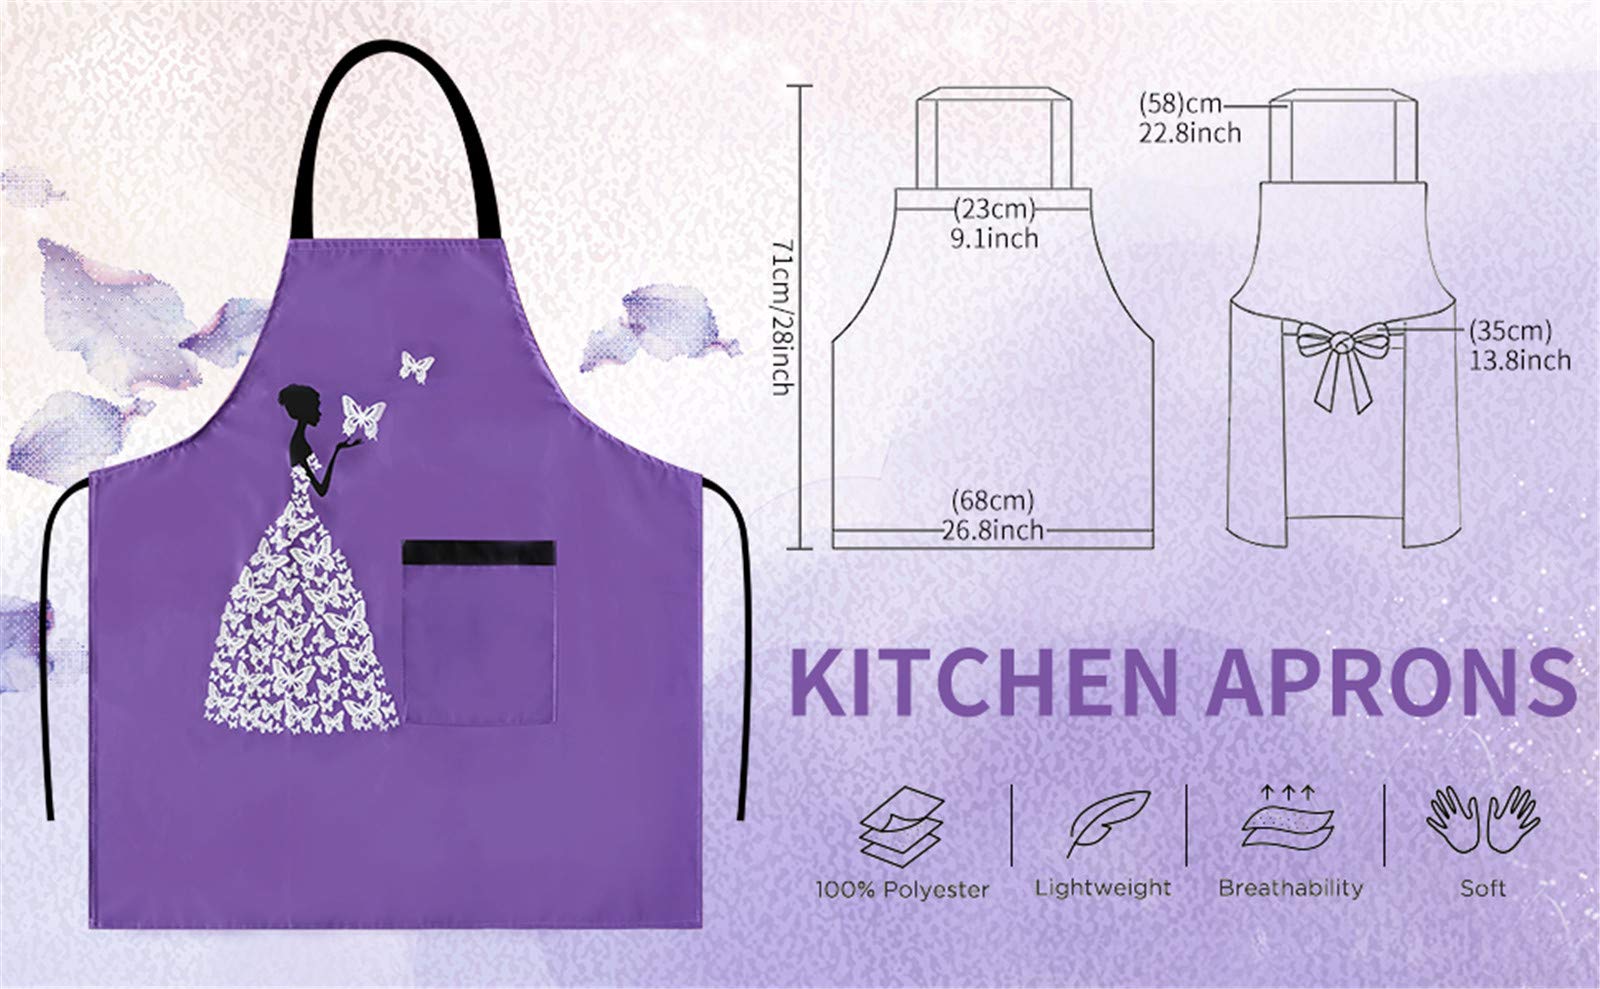 Moolecole Womens Kitchen Aprons Waterproof Bib Overalls Anti-Oil Stain Adult Sleeveless PVC Butterfly Pinafore Apron with One Pockets for Cooking Baking Purple, Valentine's Day Gift